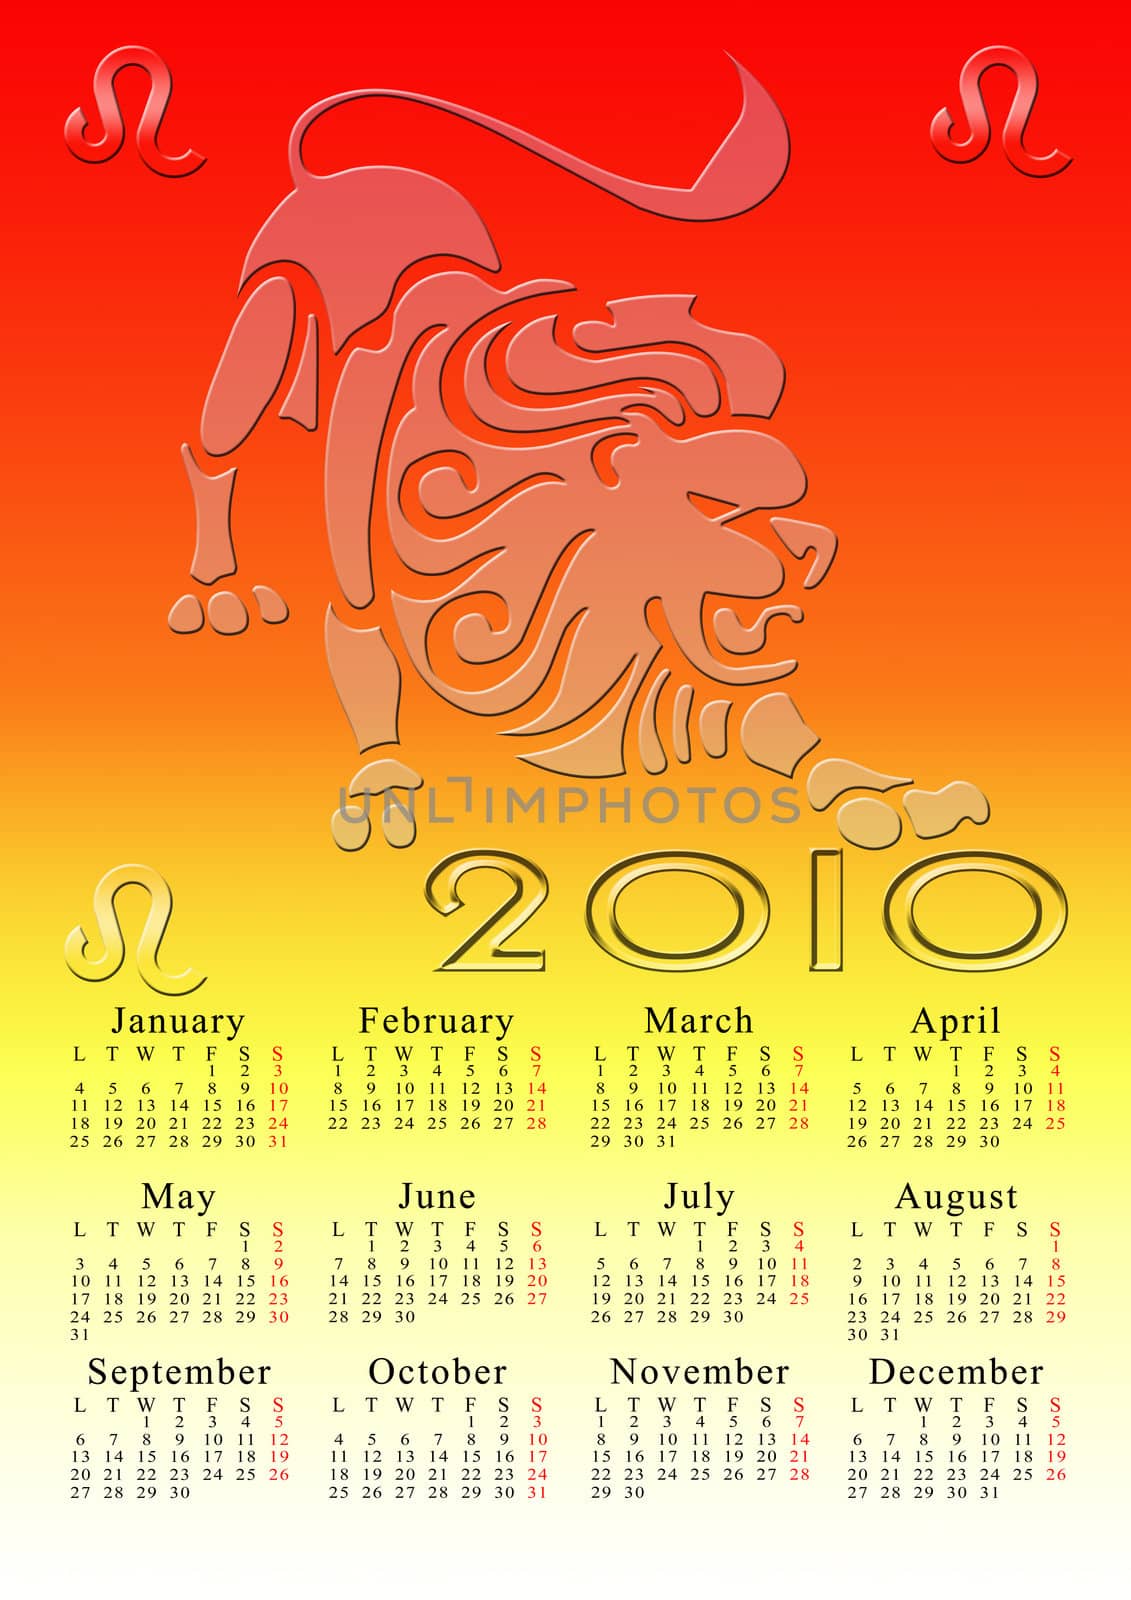 leo. calendar for the year 2010 with the astrological sign
